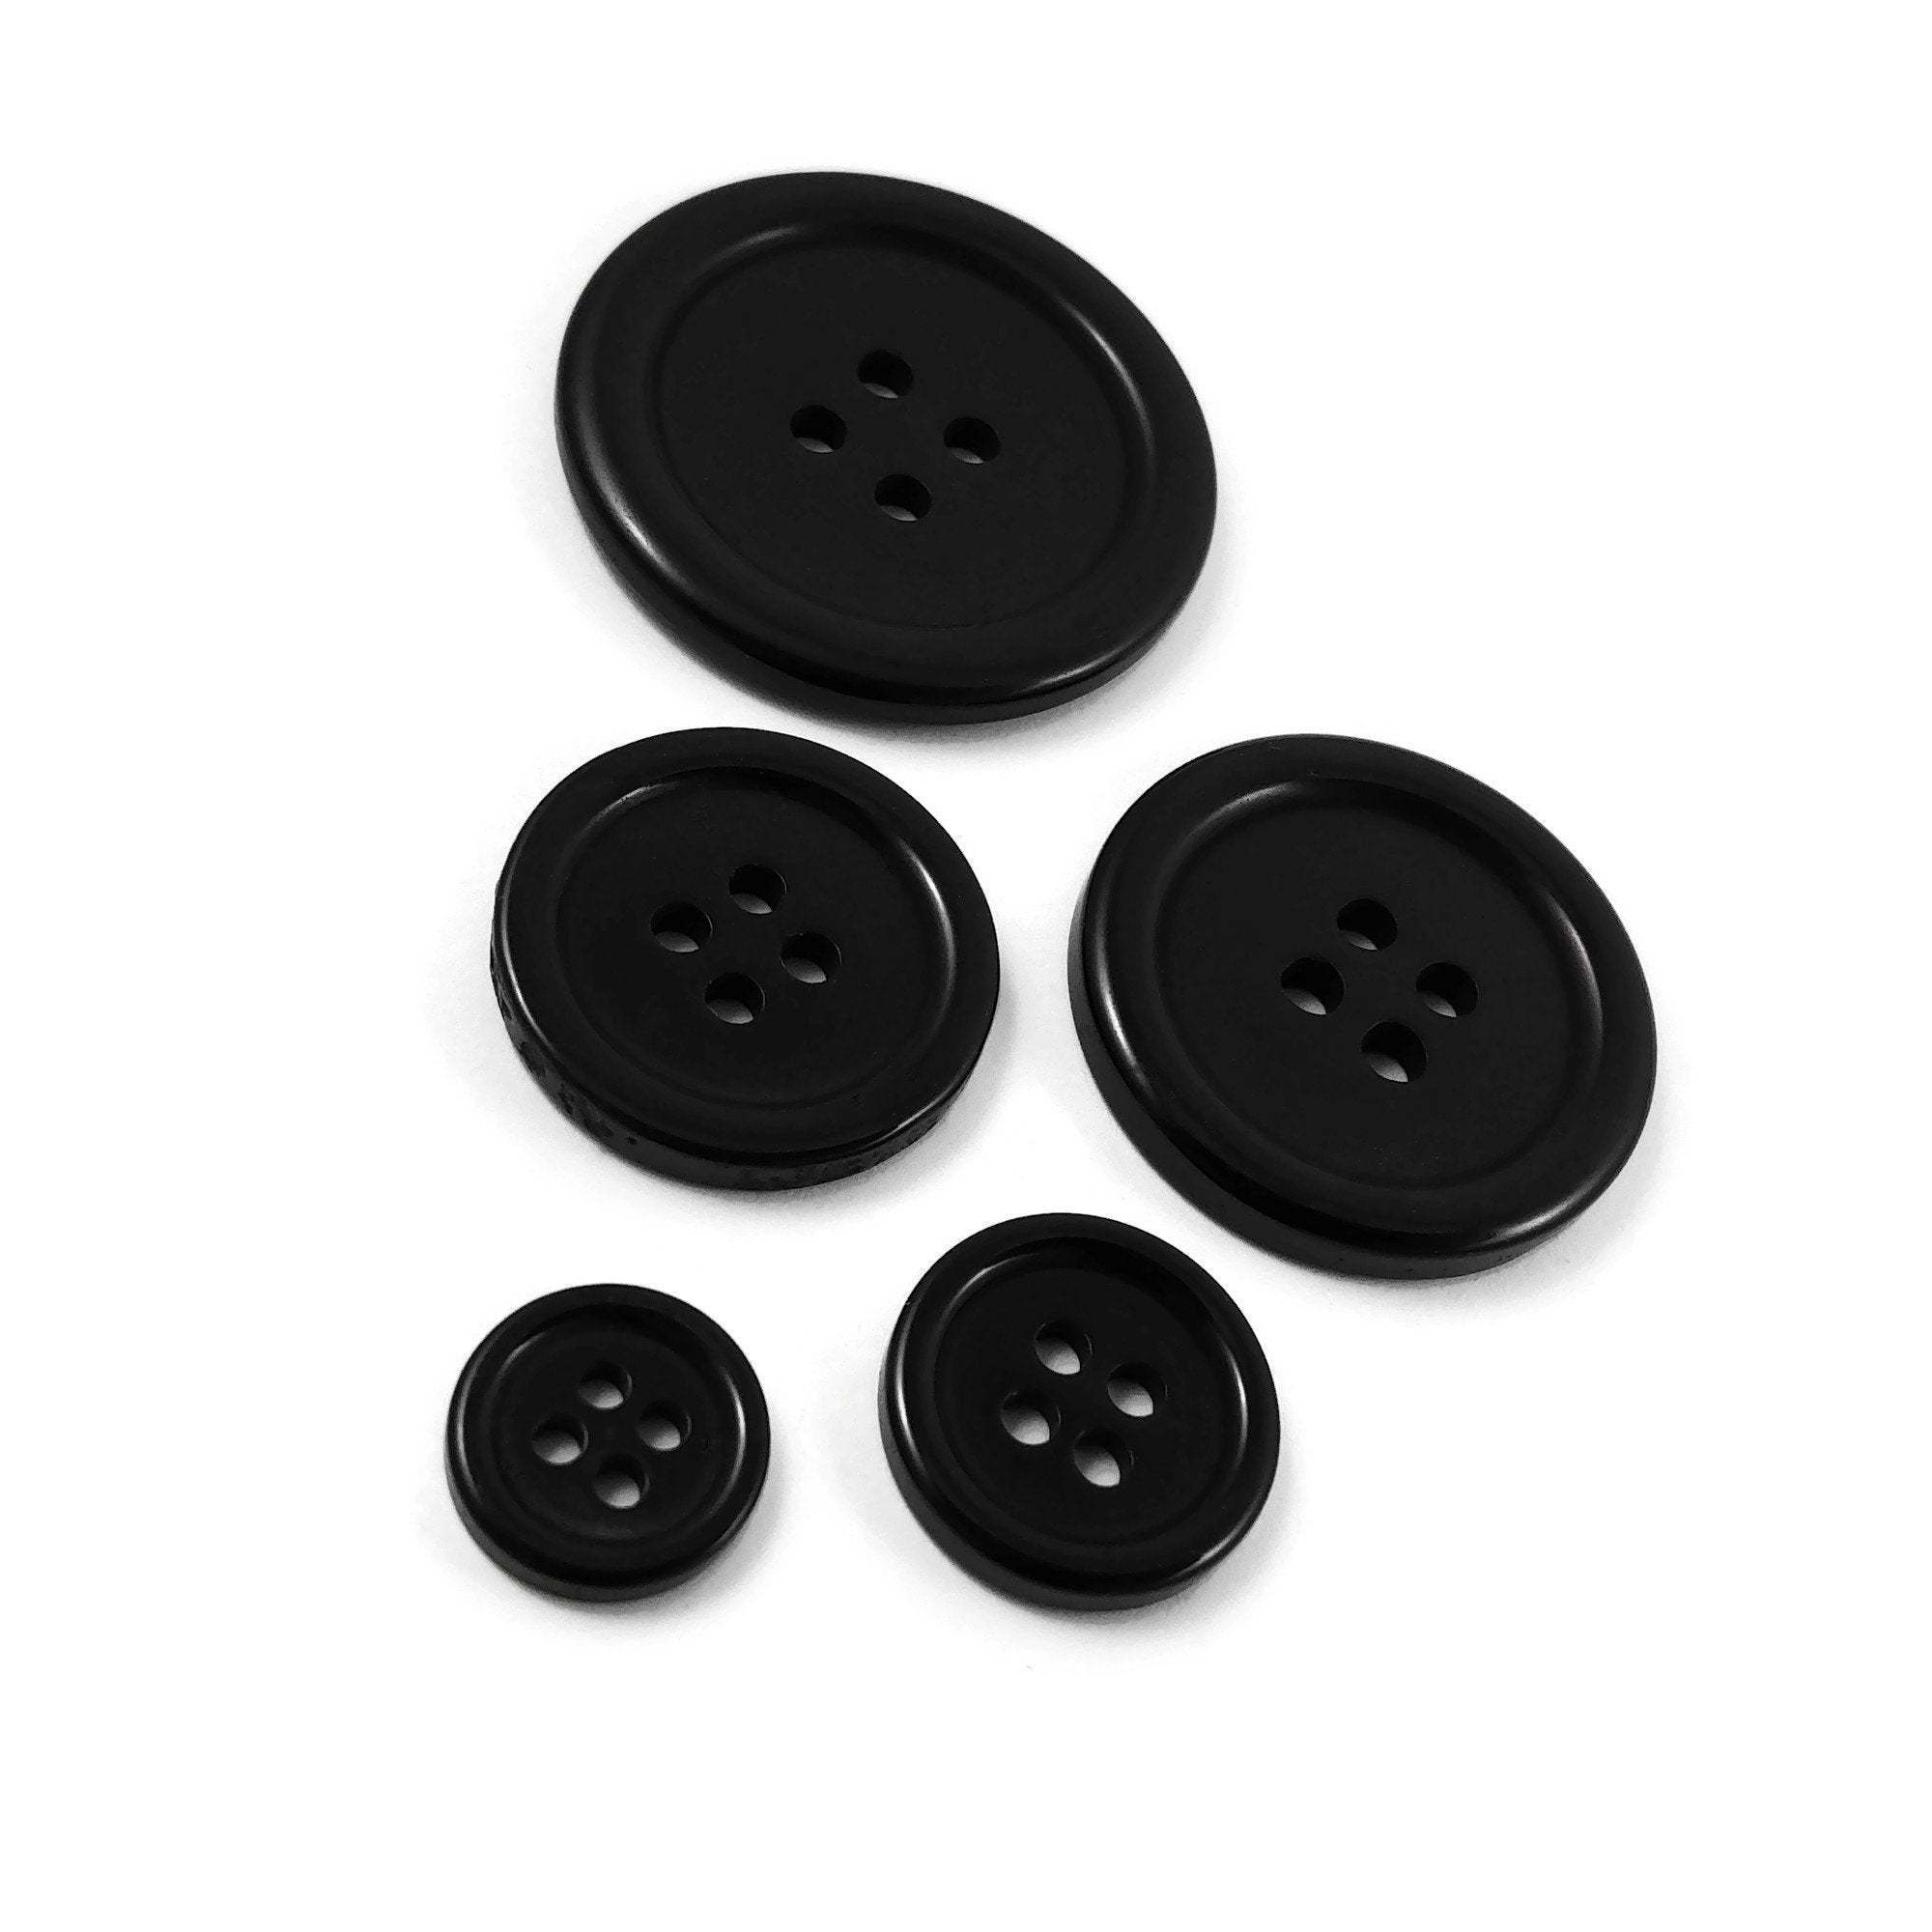 6 black resin sewing buttons - Pick your size: 11, 15, 20, 25 or 30mm